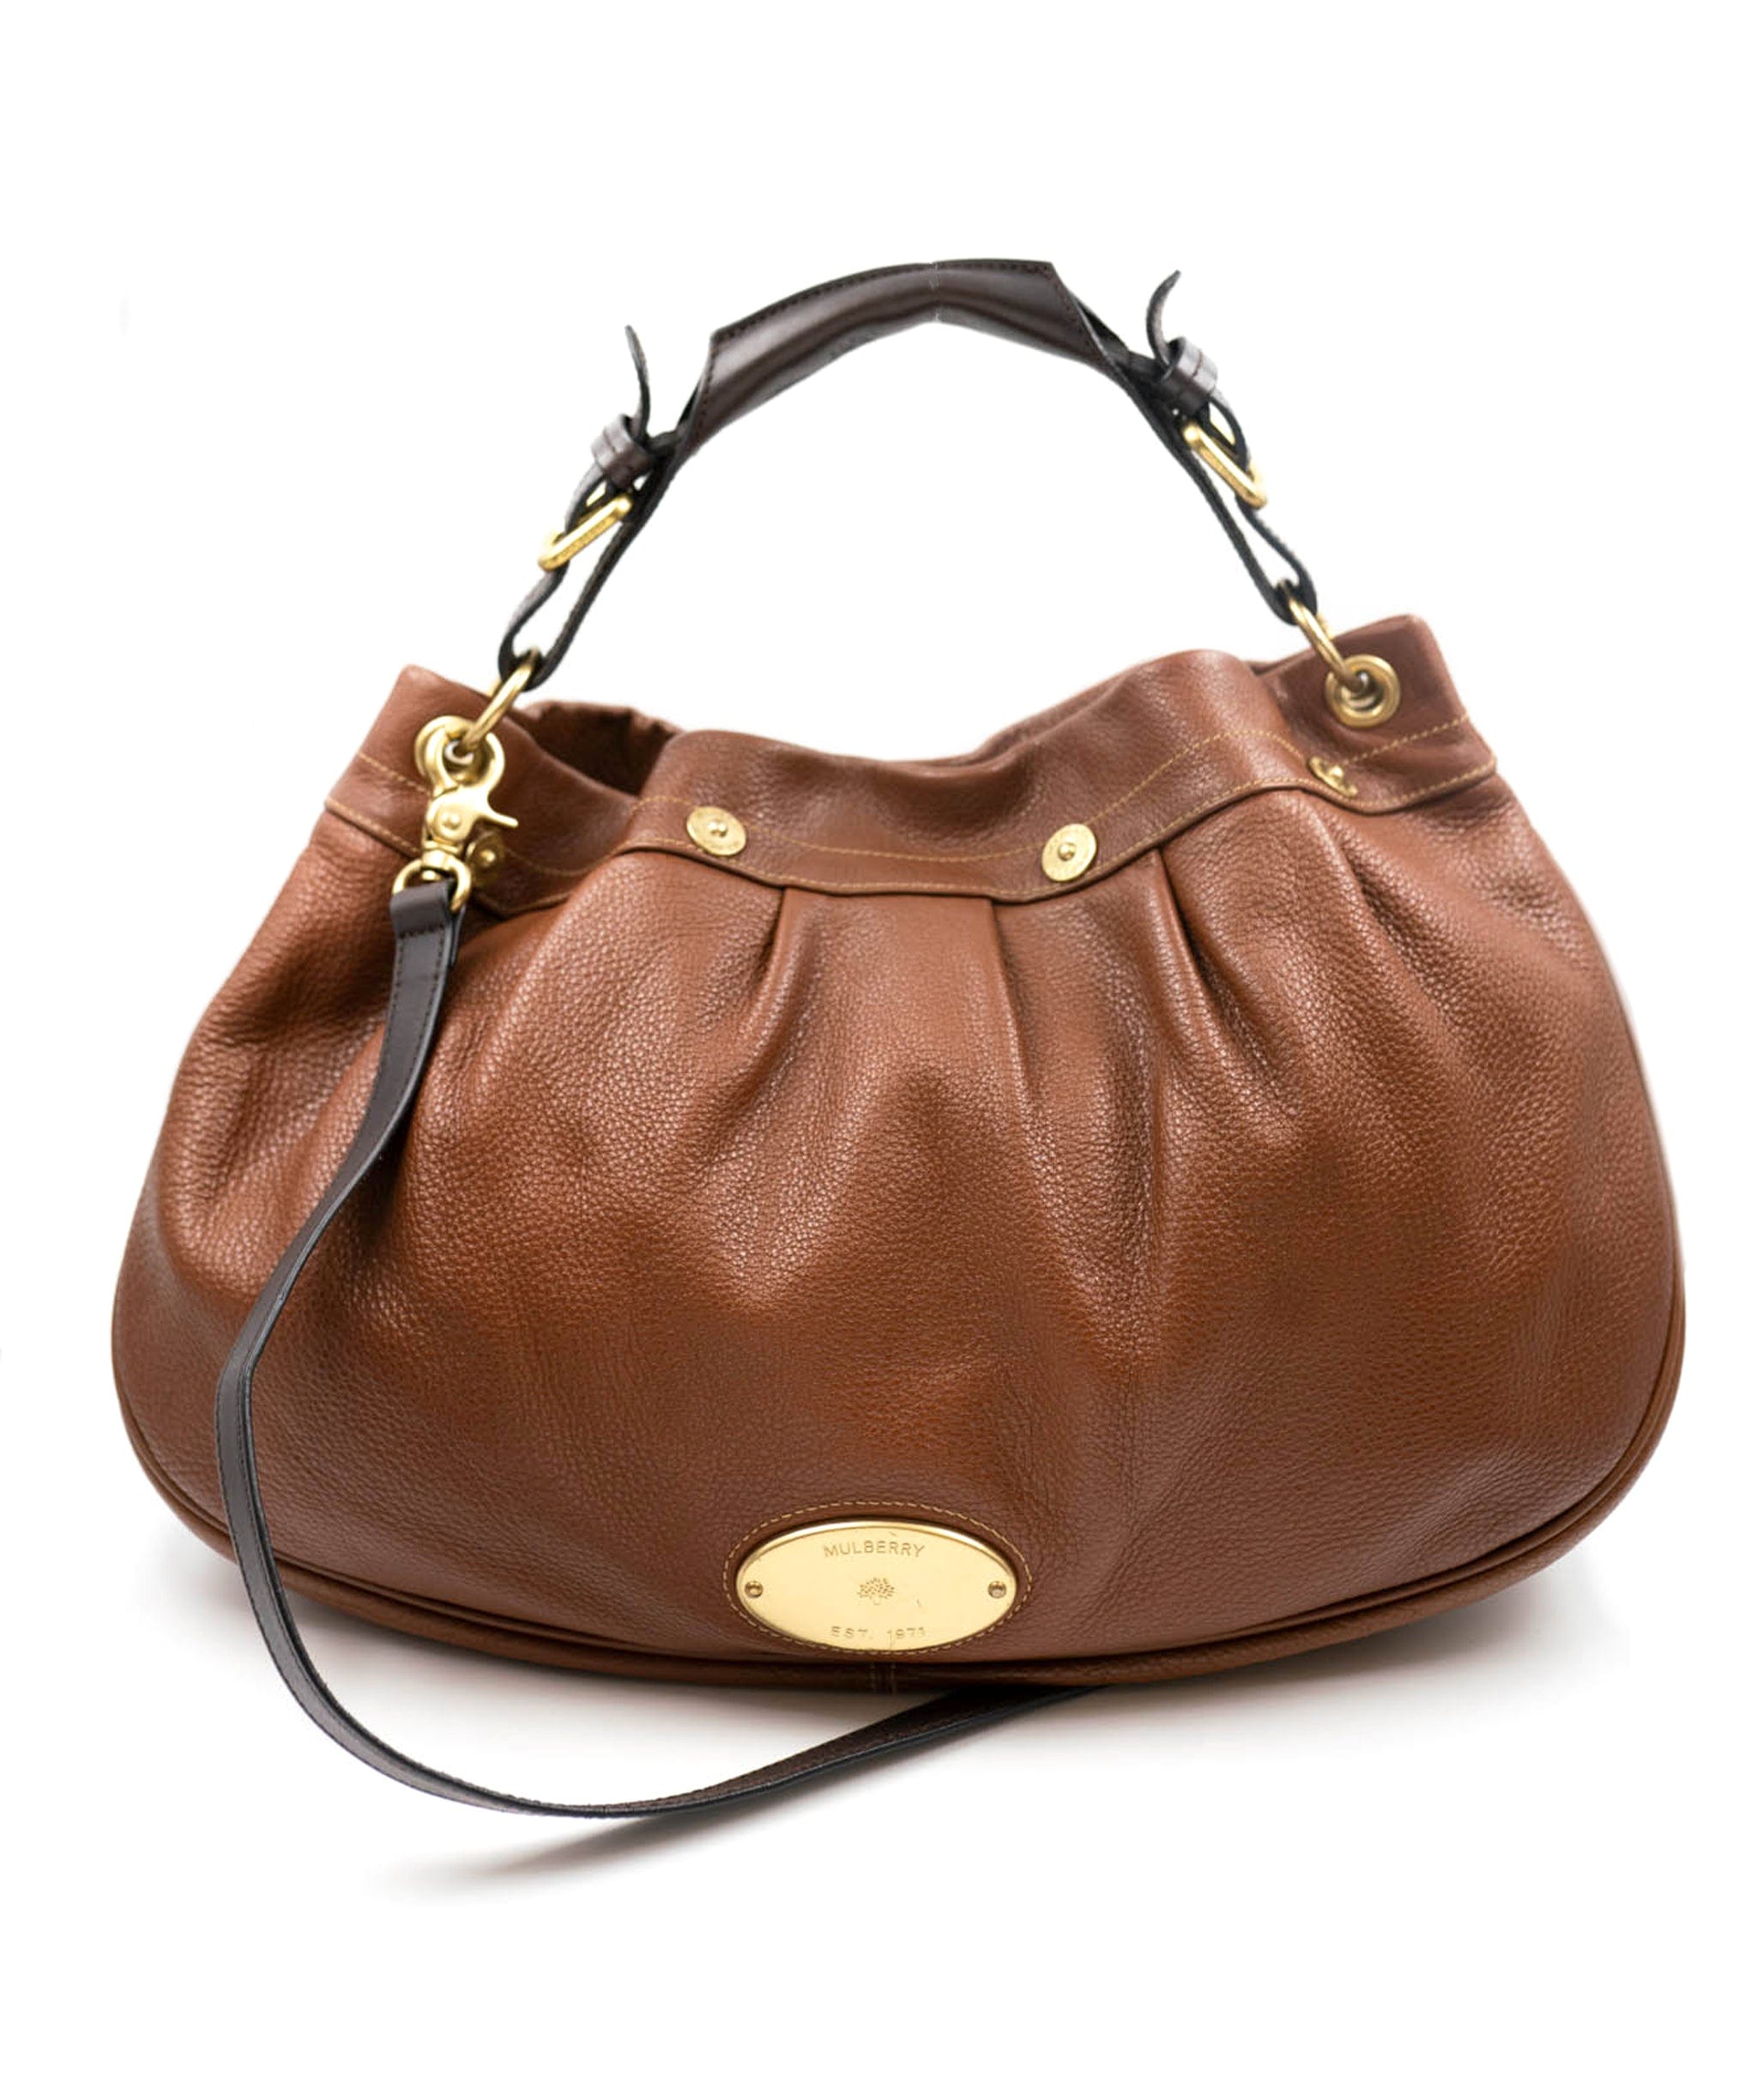 Mulberry Mulberry east west mitzy hobo tan bag AGC1391